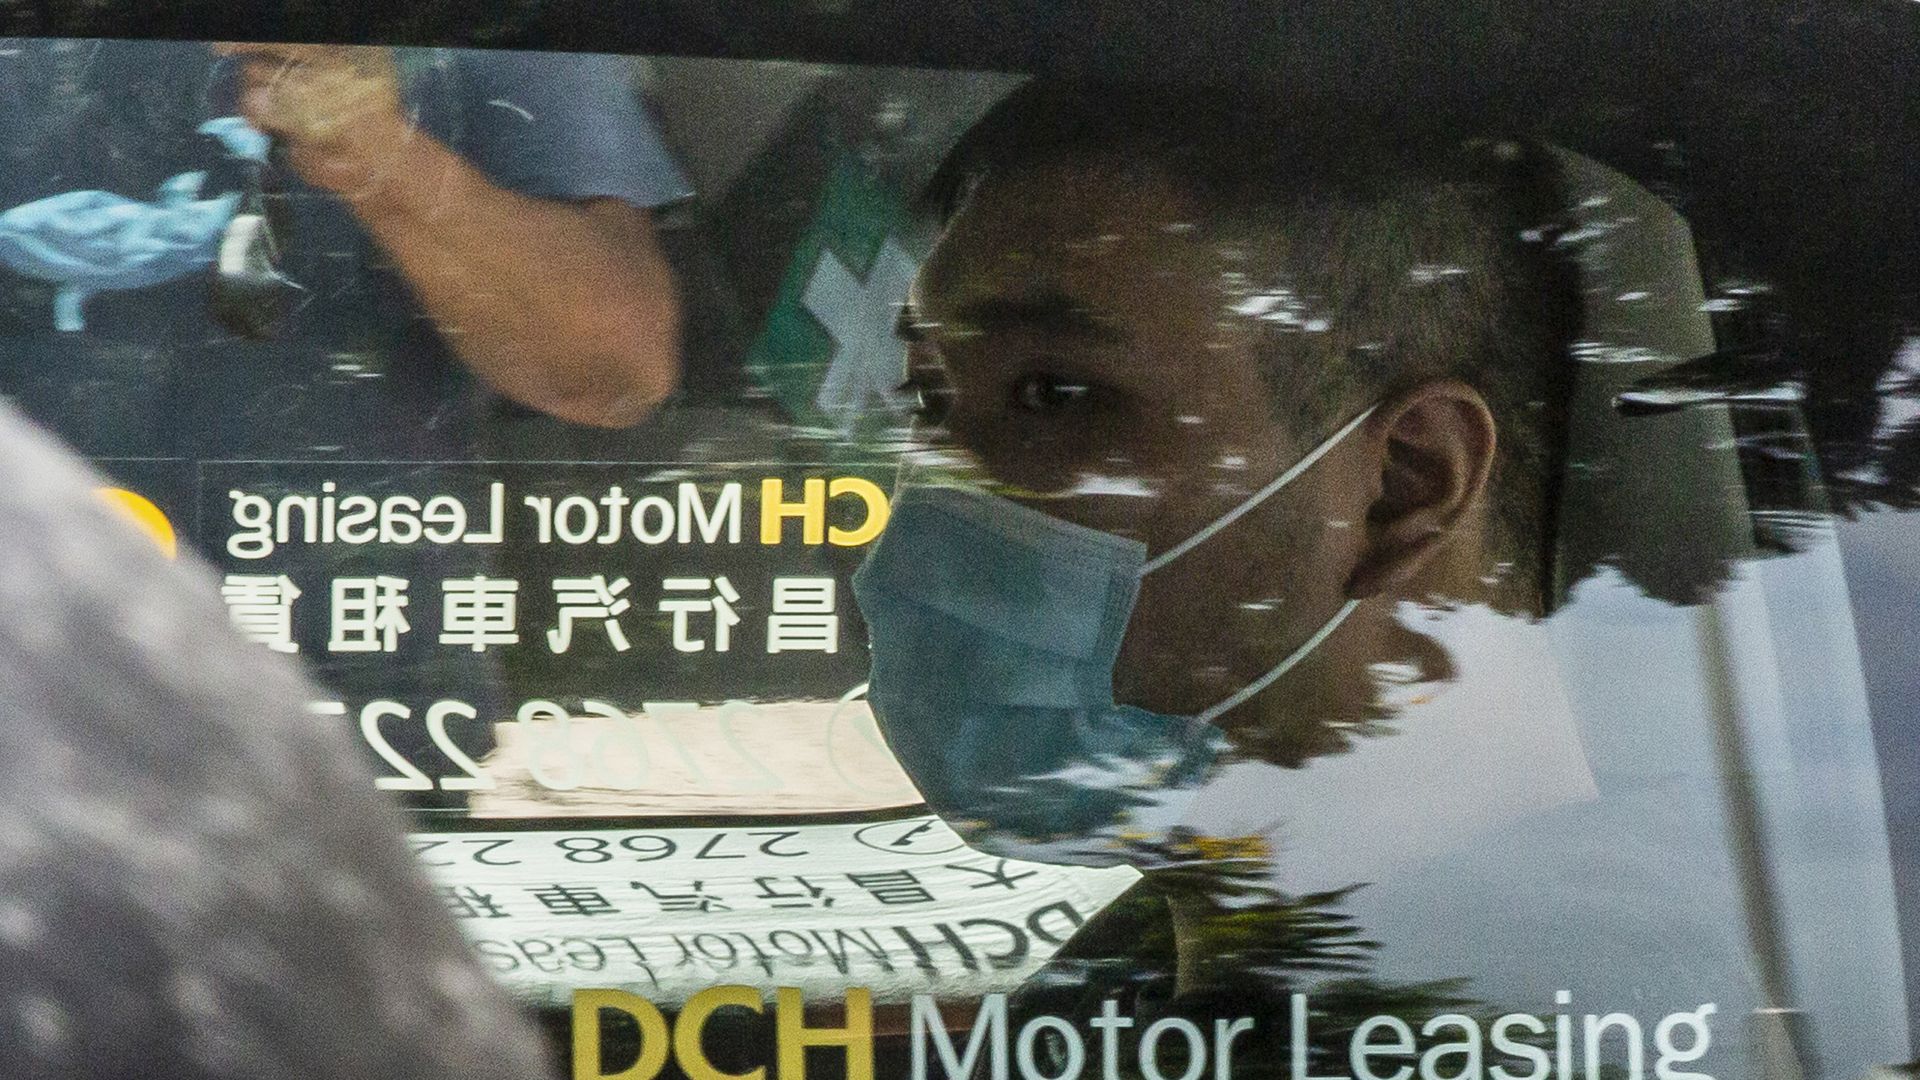 Tong Ying-kit, who is accused of deliberately driving his motorcycle into a group of police officers on July 1 in Hong Kong